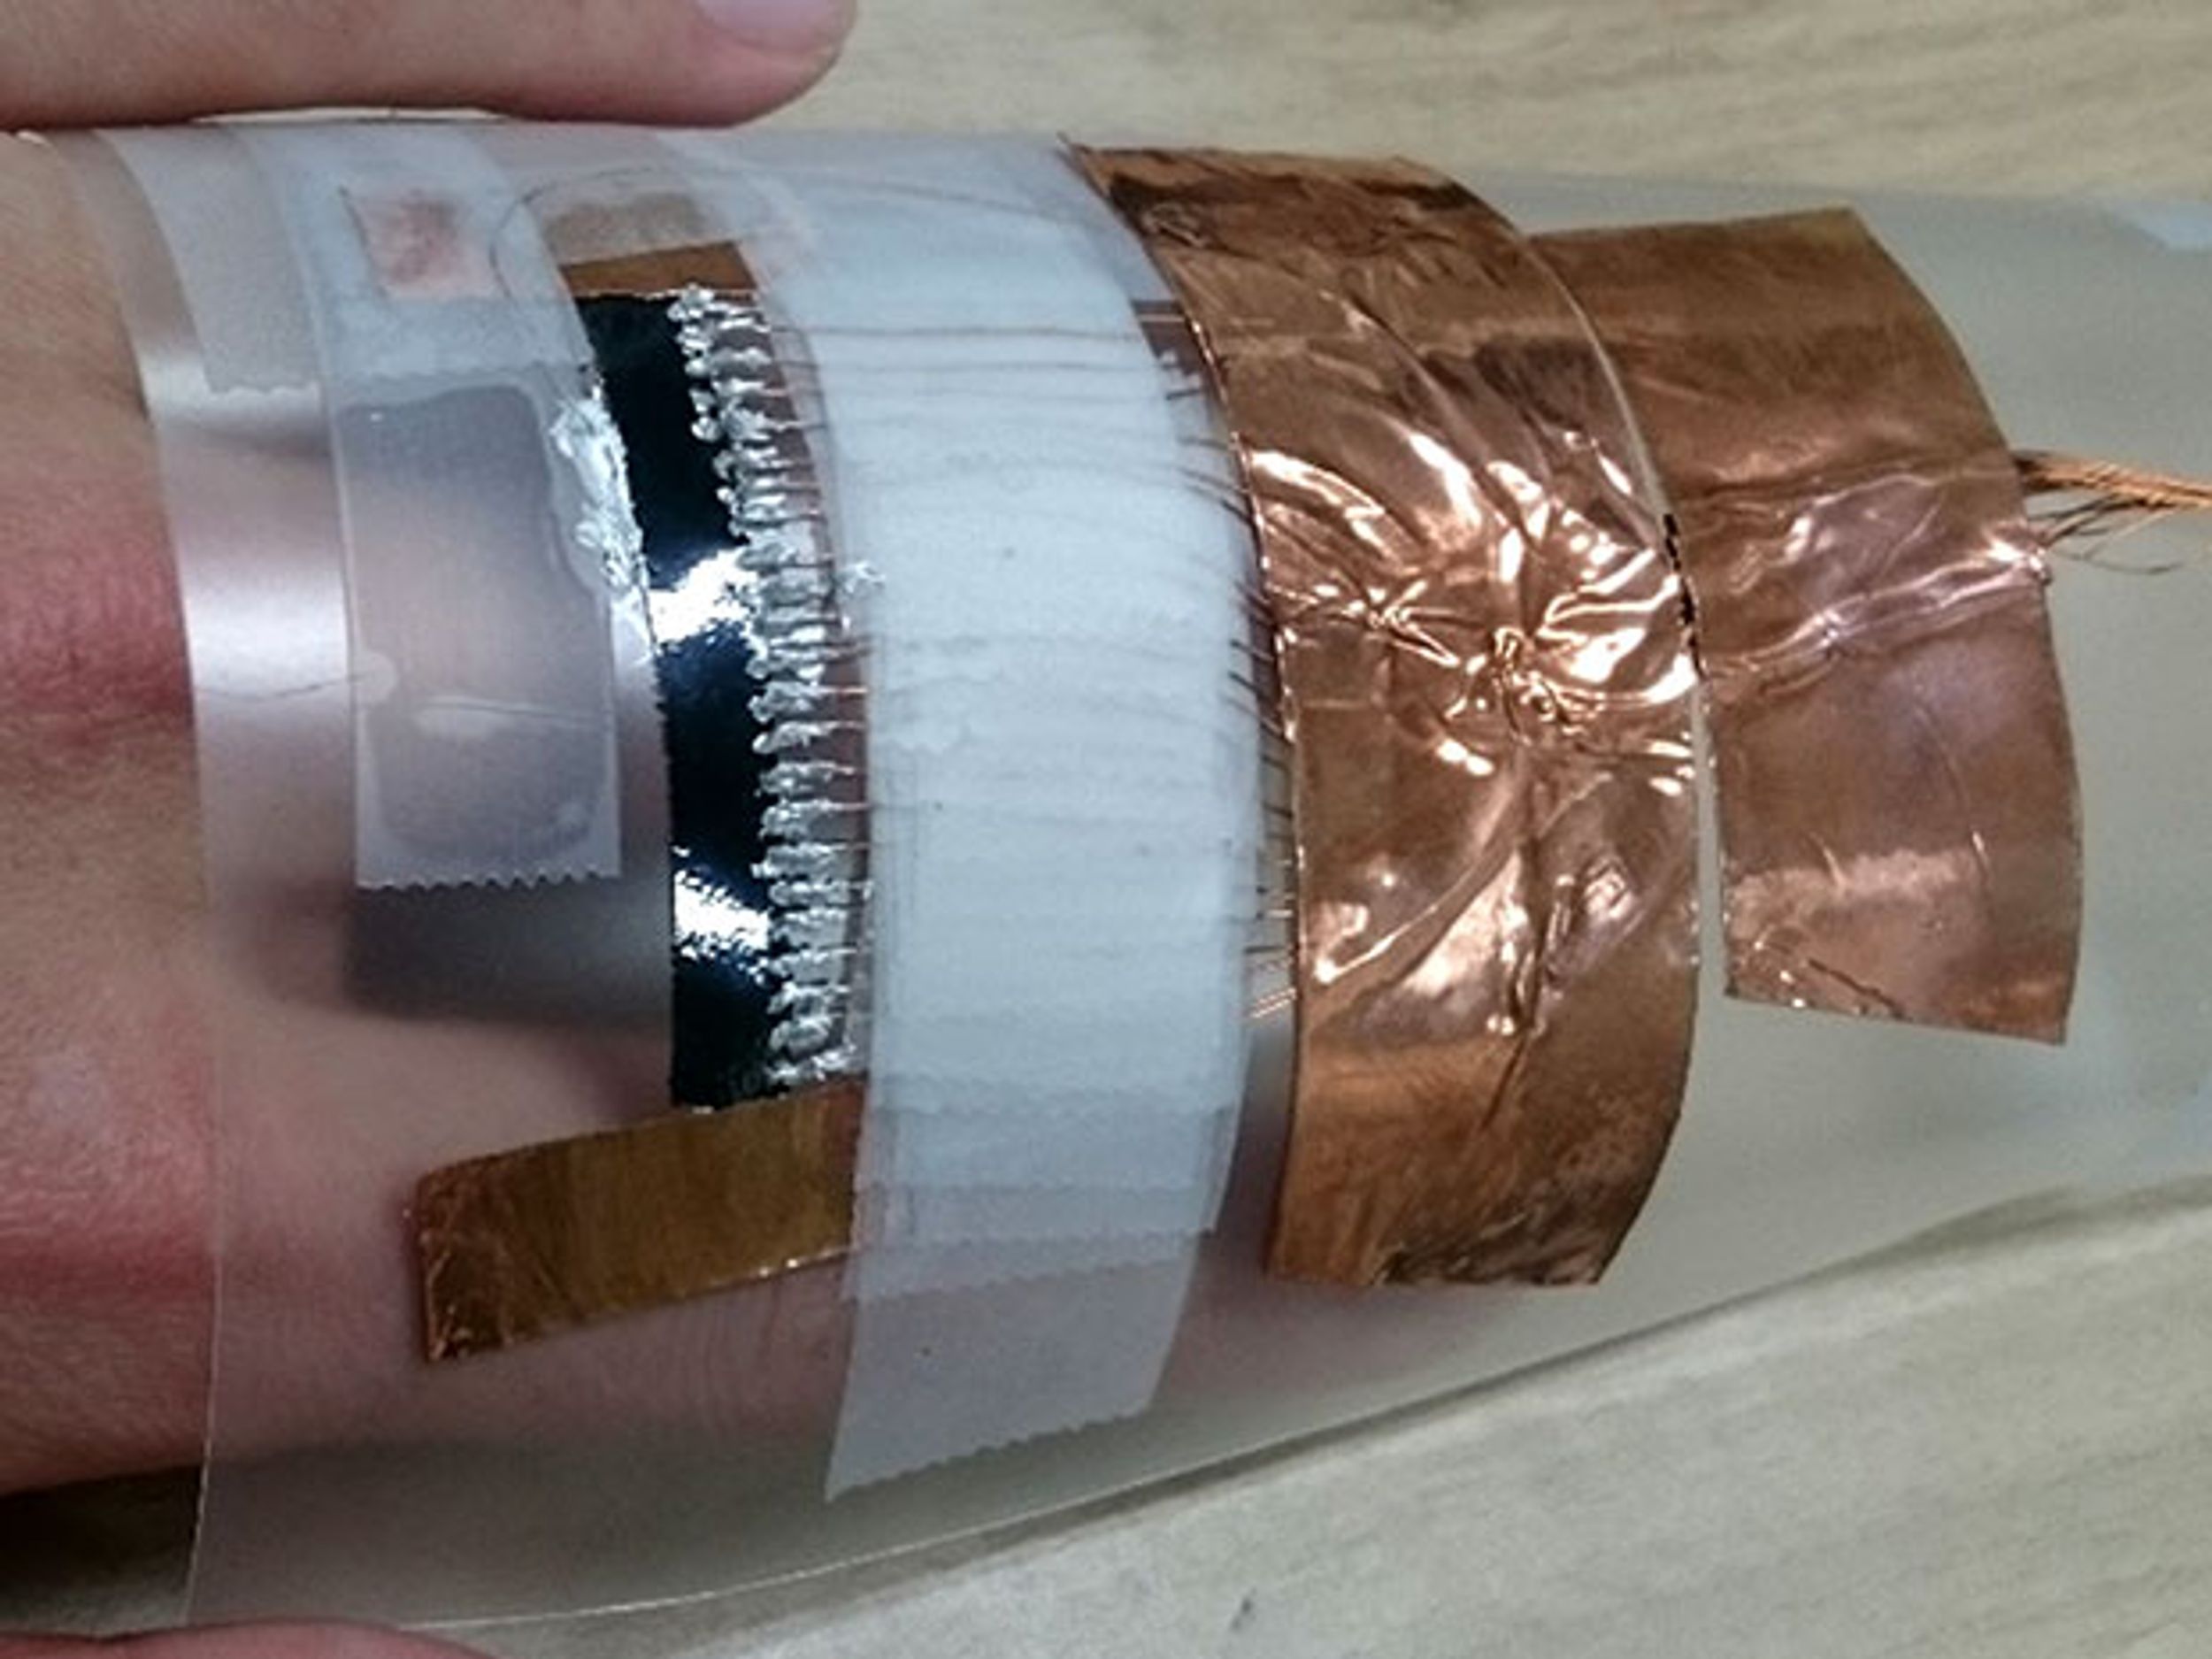 What looks like foil and wires wrapped around the back of a hand is a terahertz scanner made from carbon nanotubes